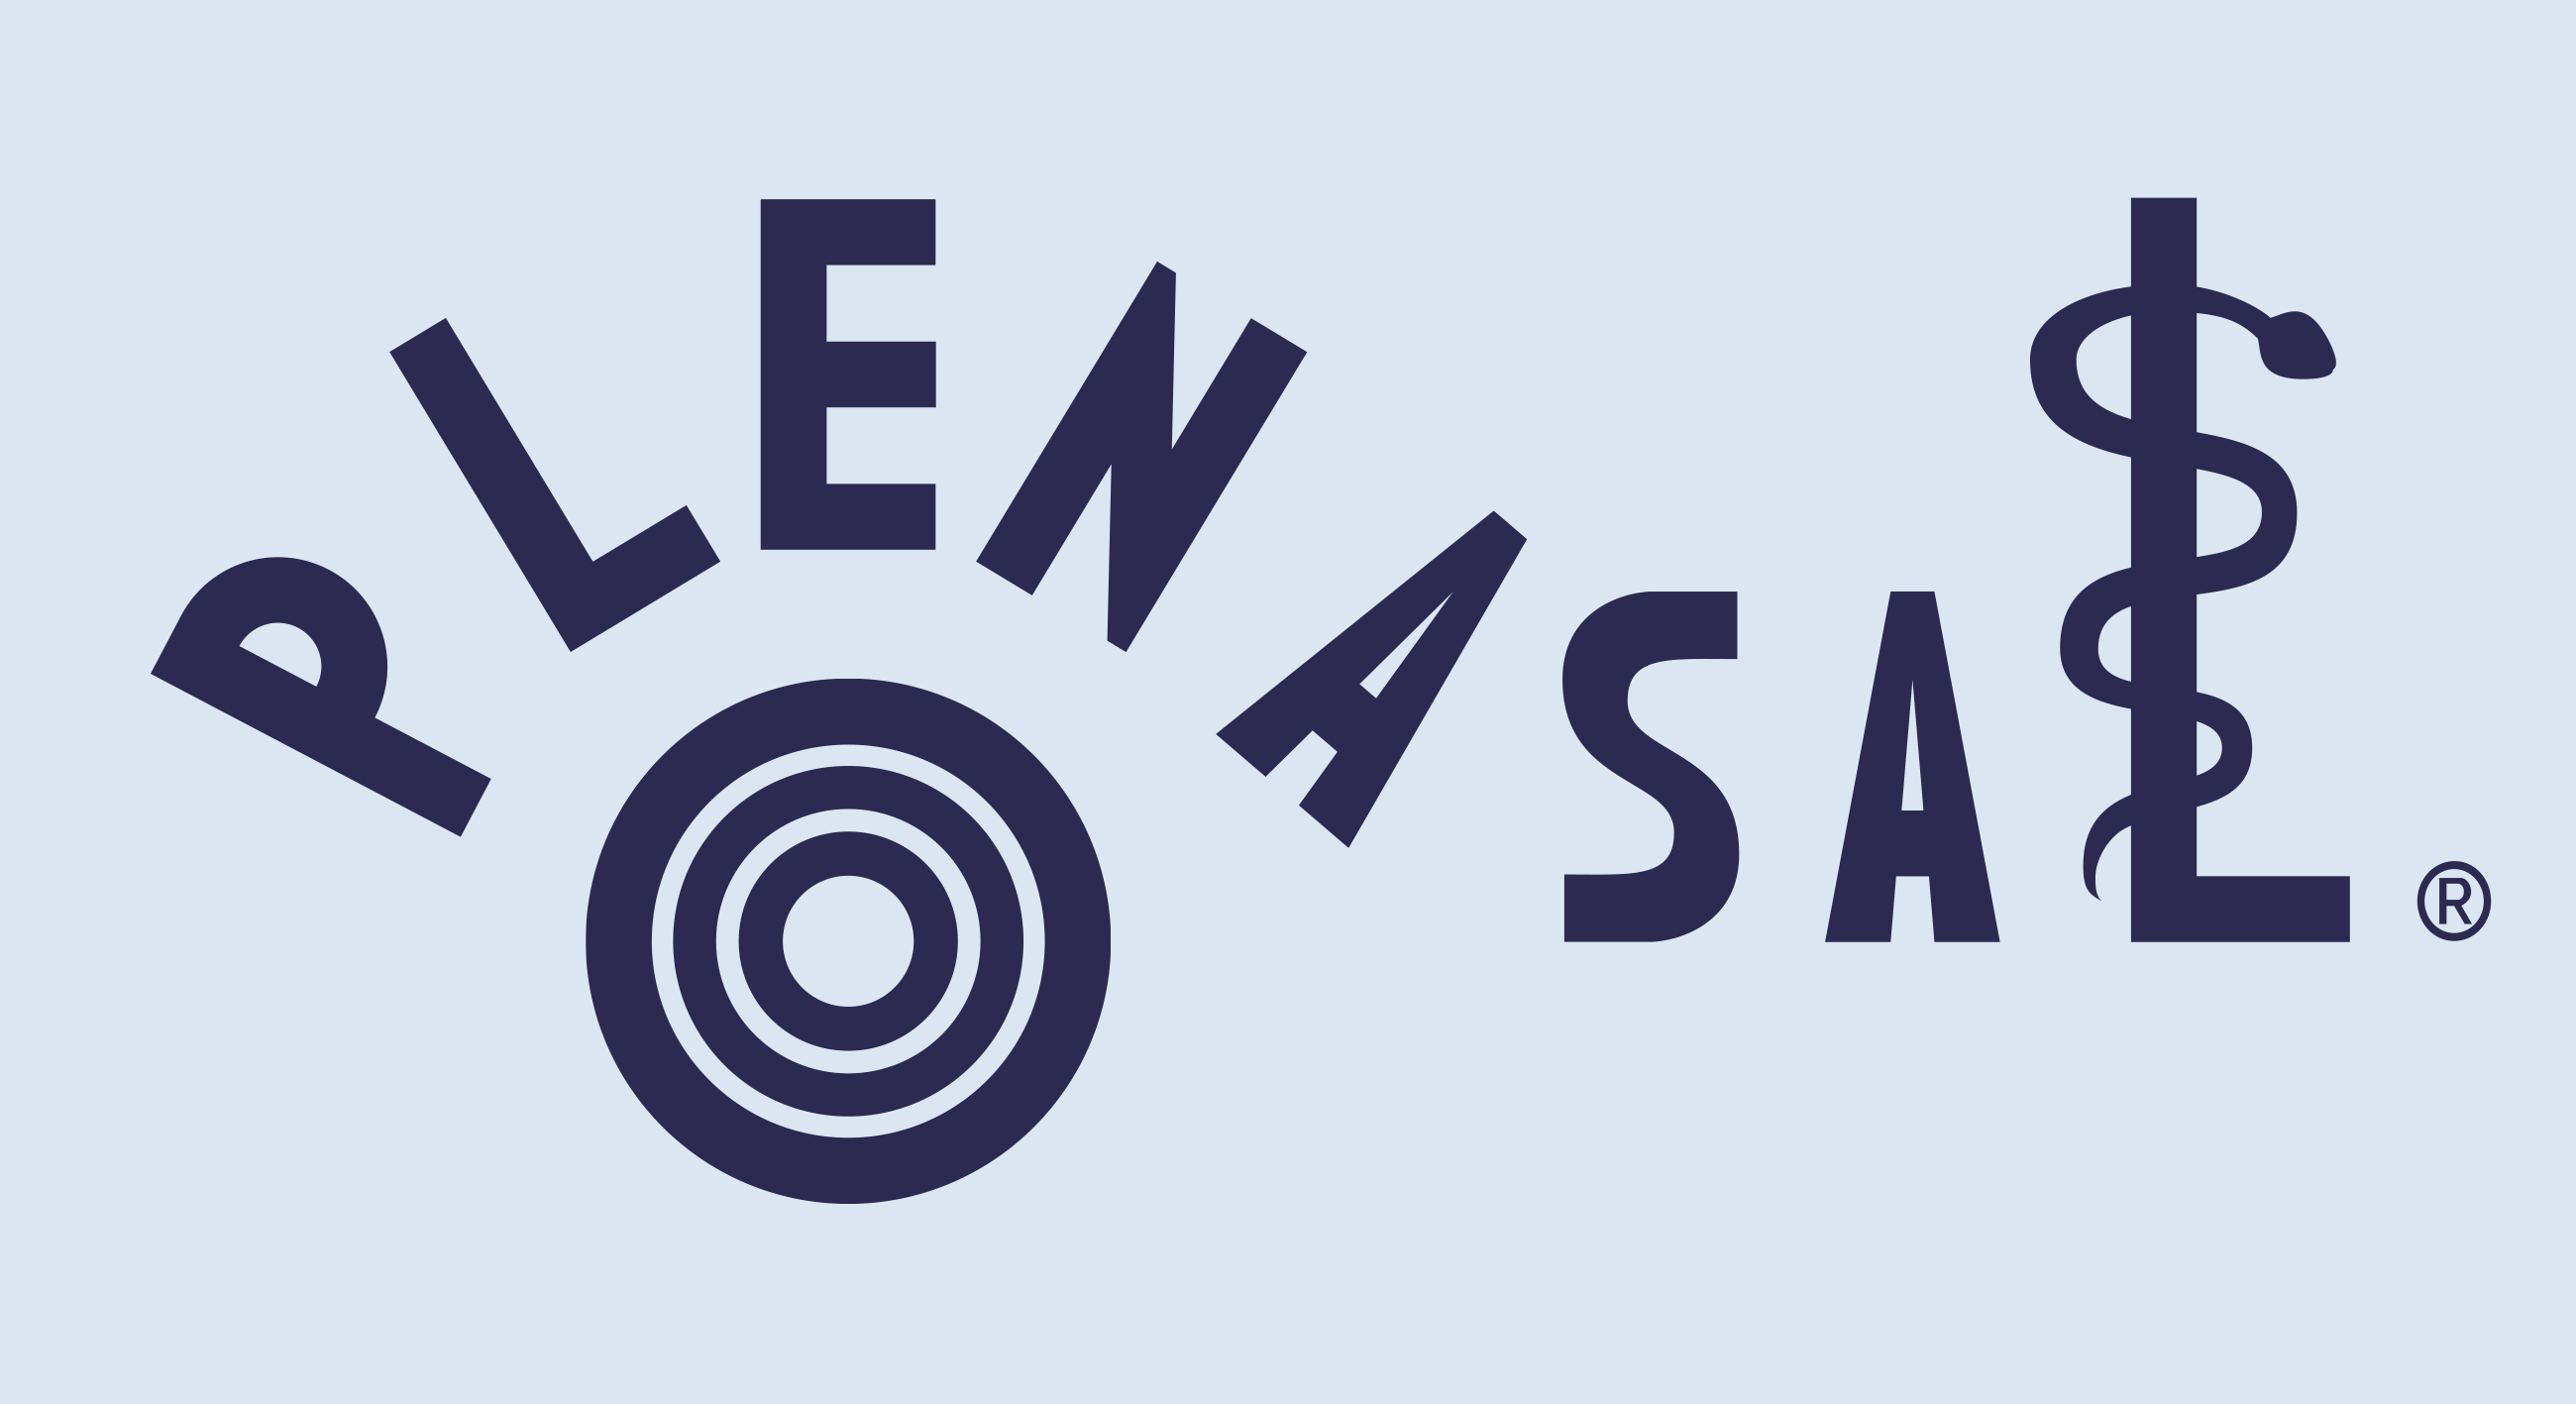 Logo of PLENASAL - the research product category focused on 'therapeutic nurturance' in hospitals